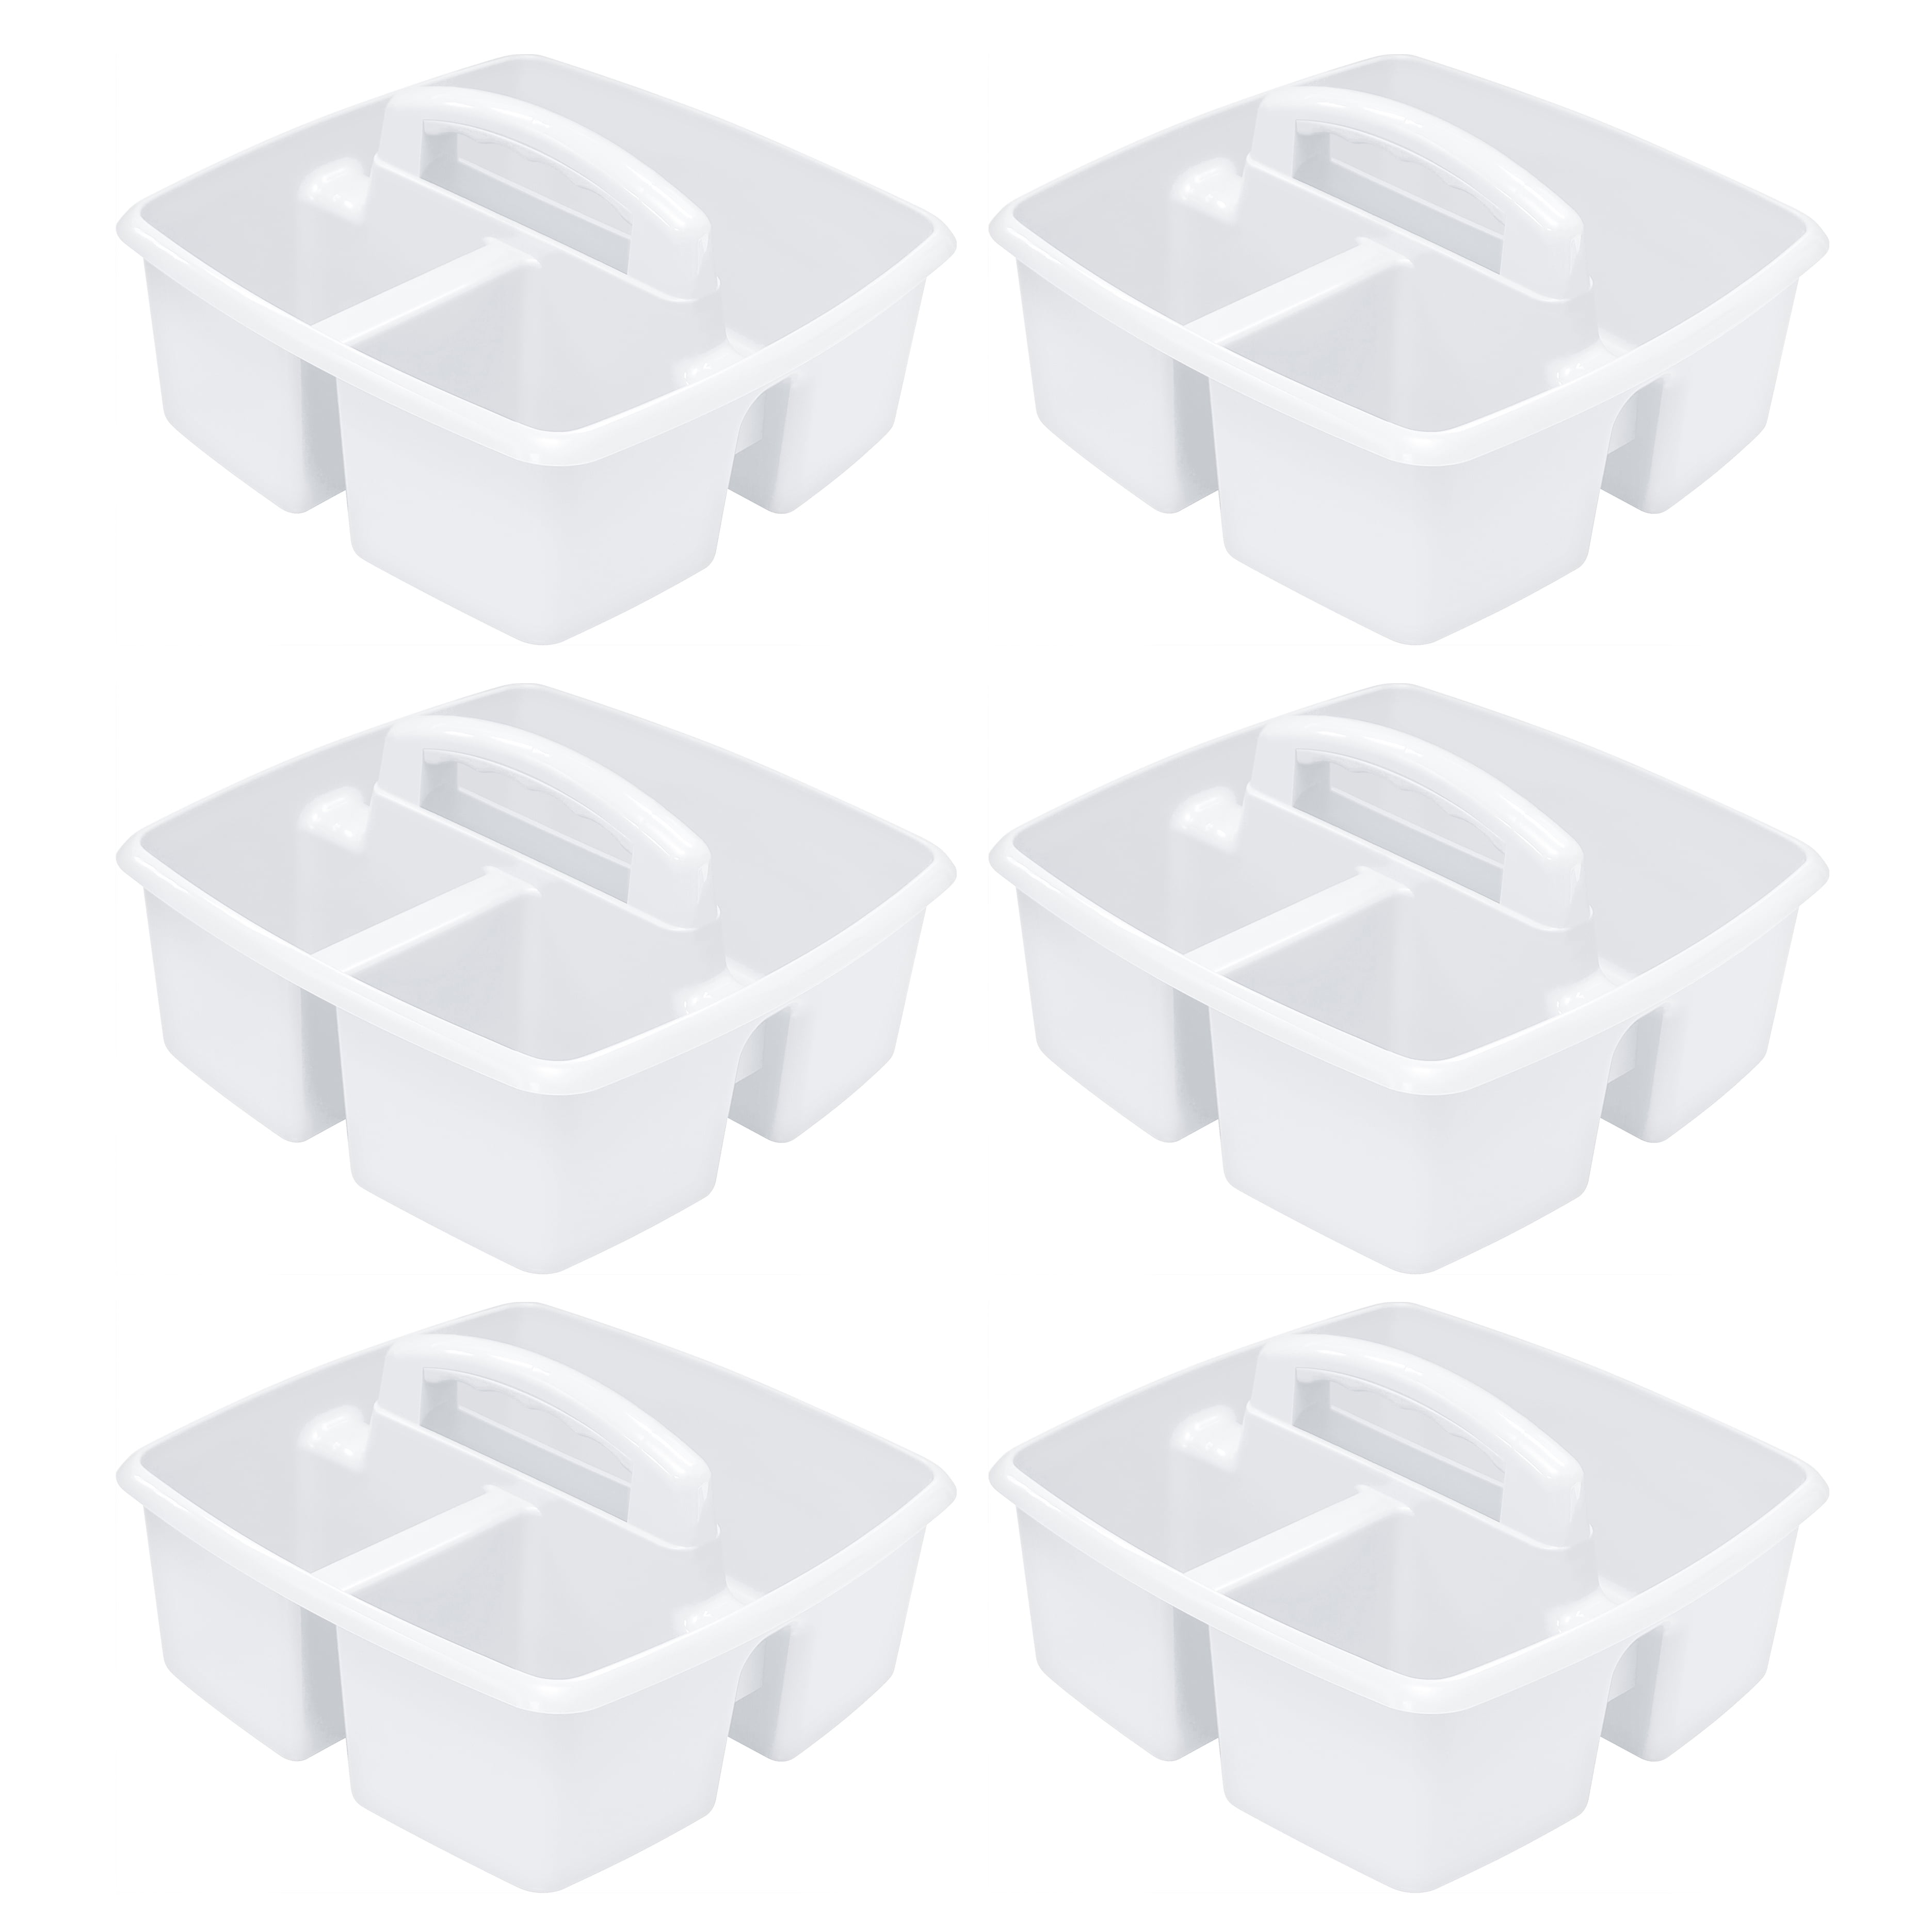 Pen+Gear Plastic Caddy, Craft and Hobby Organizer, White, 6-Pack